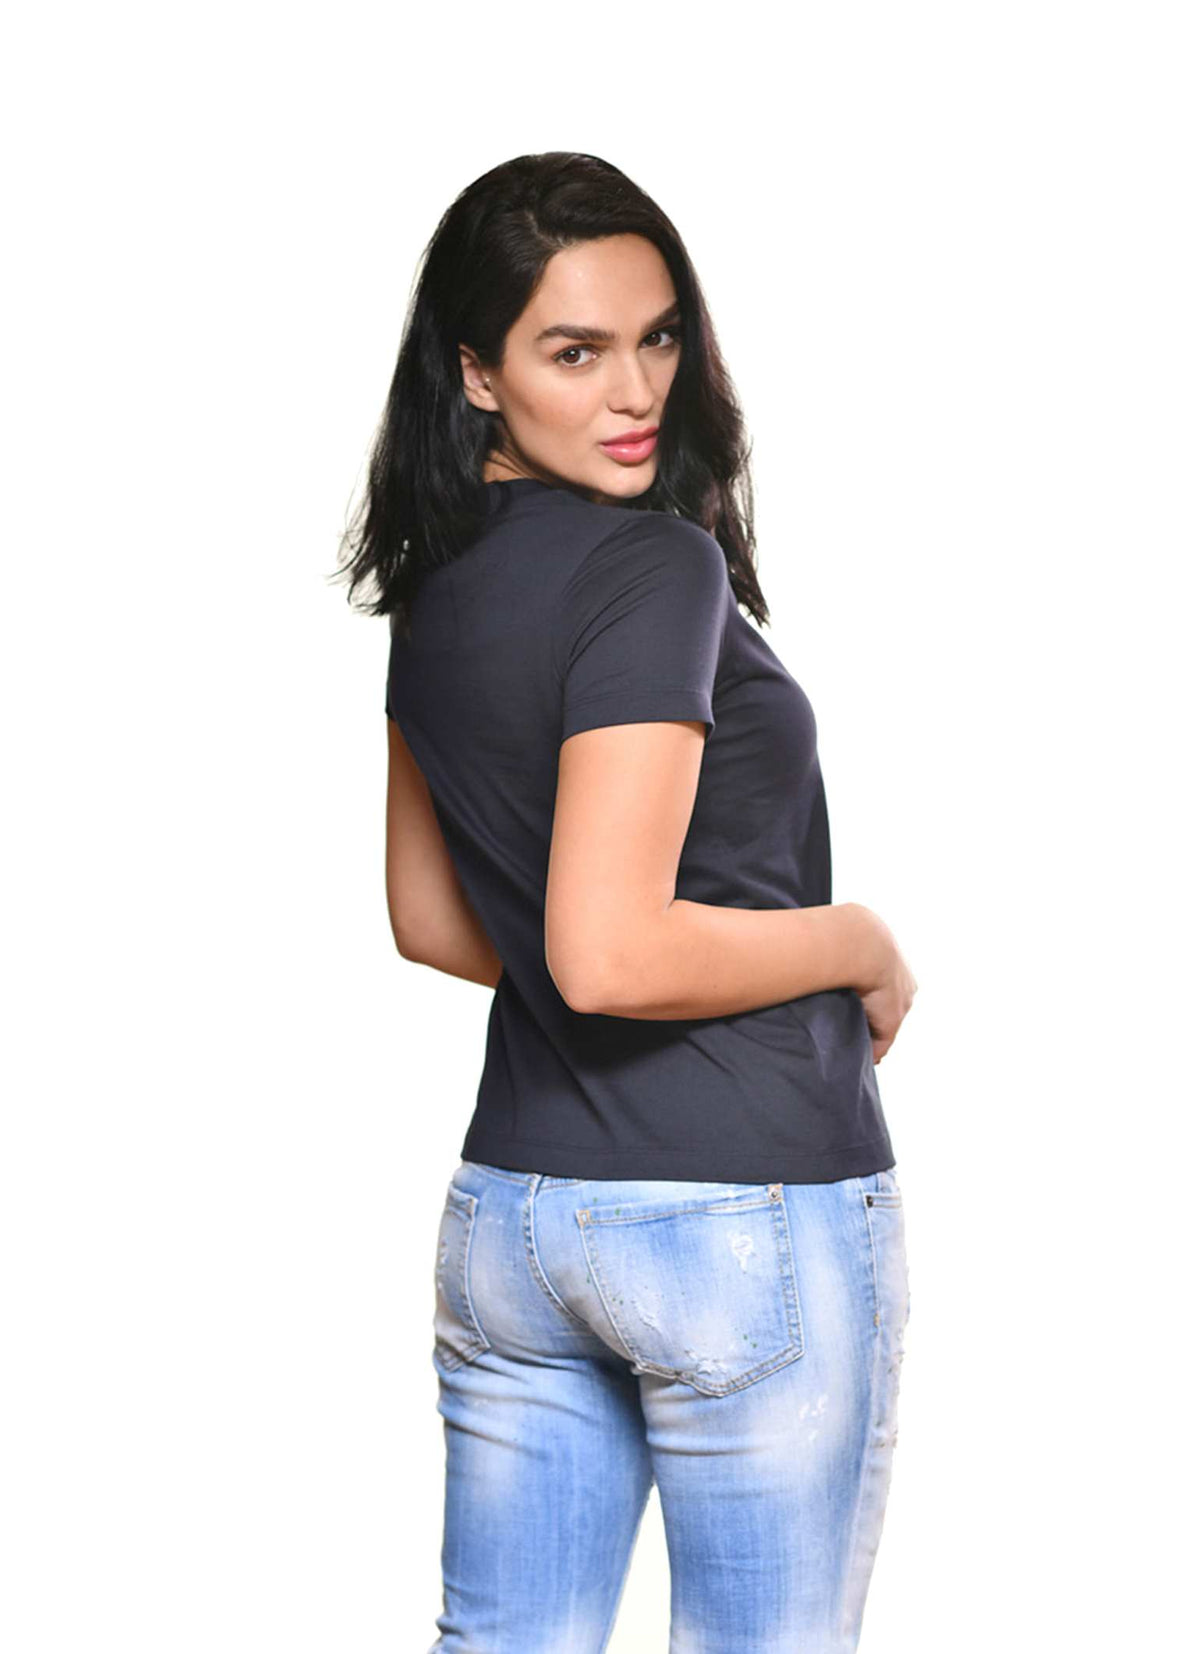 Carmen Sol round neck tee shirts for women which are short sleeve in color mid night blue 